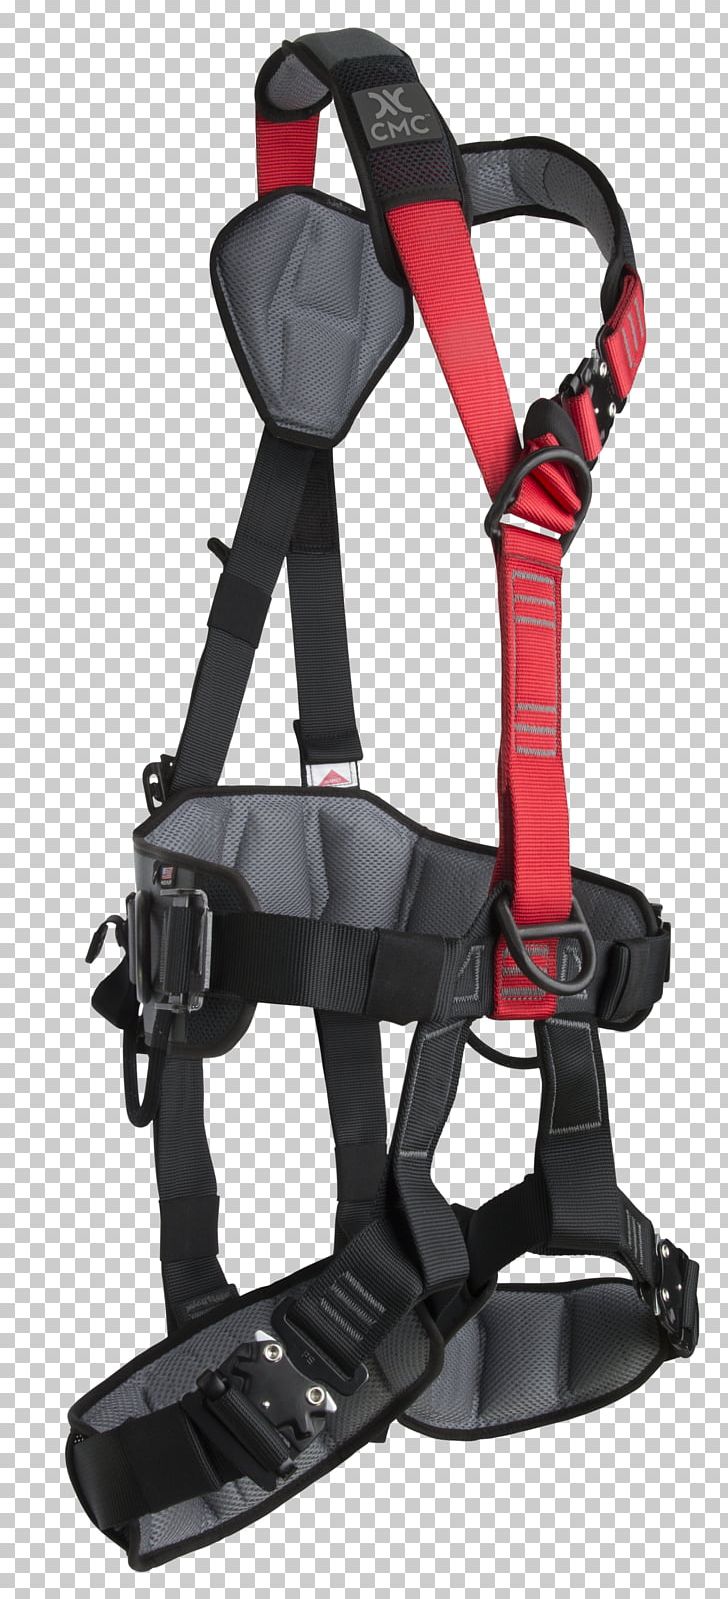 Climbing Harnesses Horse Harnesses Dog Rescue Abseiling PNG, Clipart, Animals, Belaying, Climbing Harness, Climbing Harnesses, Dog Free PNG Download